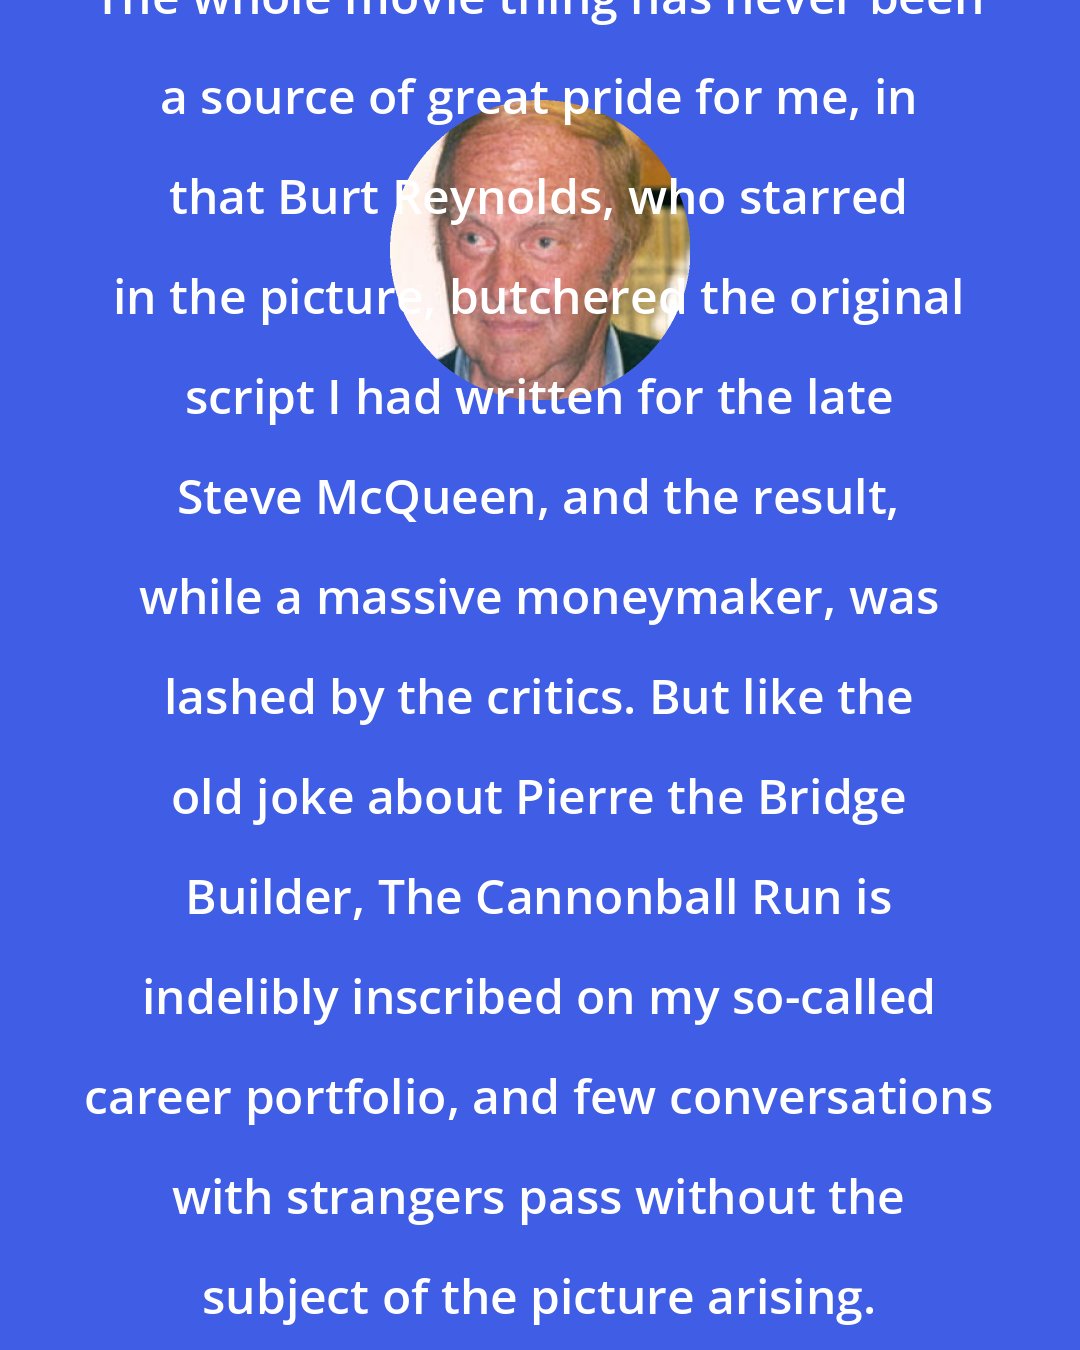 Brock Yates: The whole movie thing has never been a source of great pride for me, in that Burt Reynolds, who starred in the picture, butchered the original script I had written for the late Steve McQueen, and the result, while a massive moneymaker, was lashed by the critics. But like the old joke about Pierre the Bridge Builder, The Cannonball Run is indelibly inscribed on my so-called career portfolio, and few conversations with strangers pass without the subject of the picture arising.